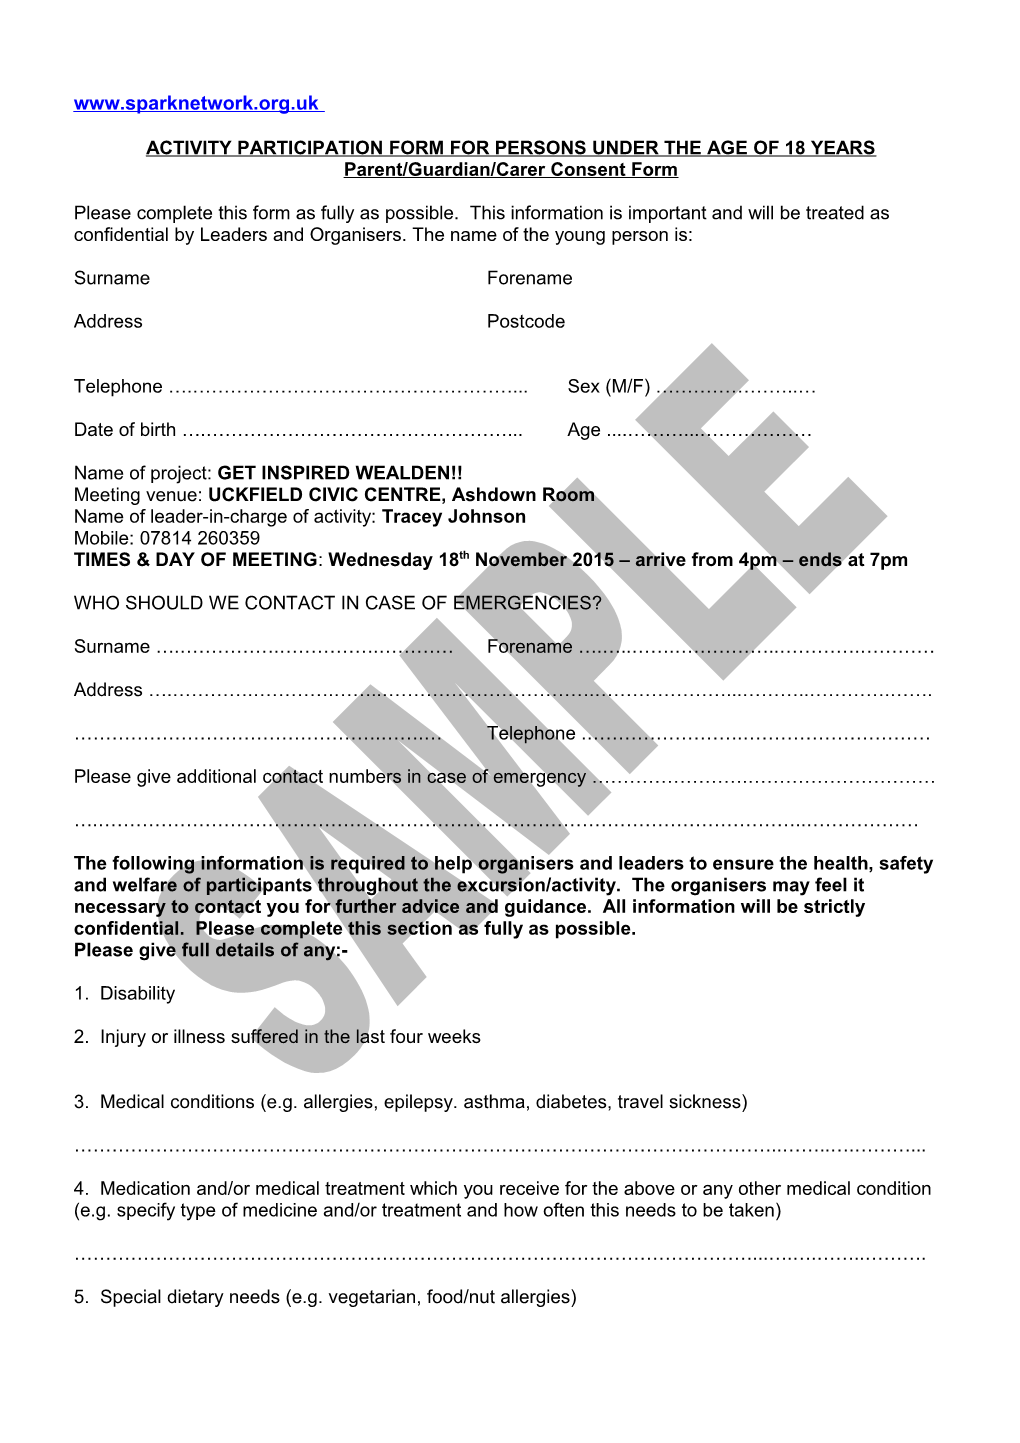 Activity Participation Form for Persons Under the Age of 18 Years